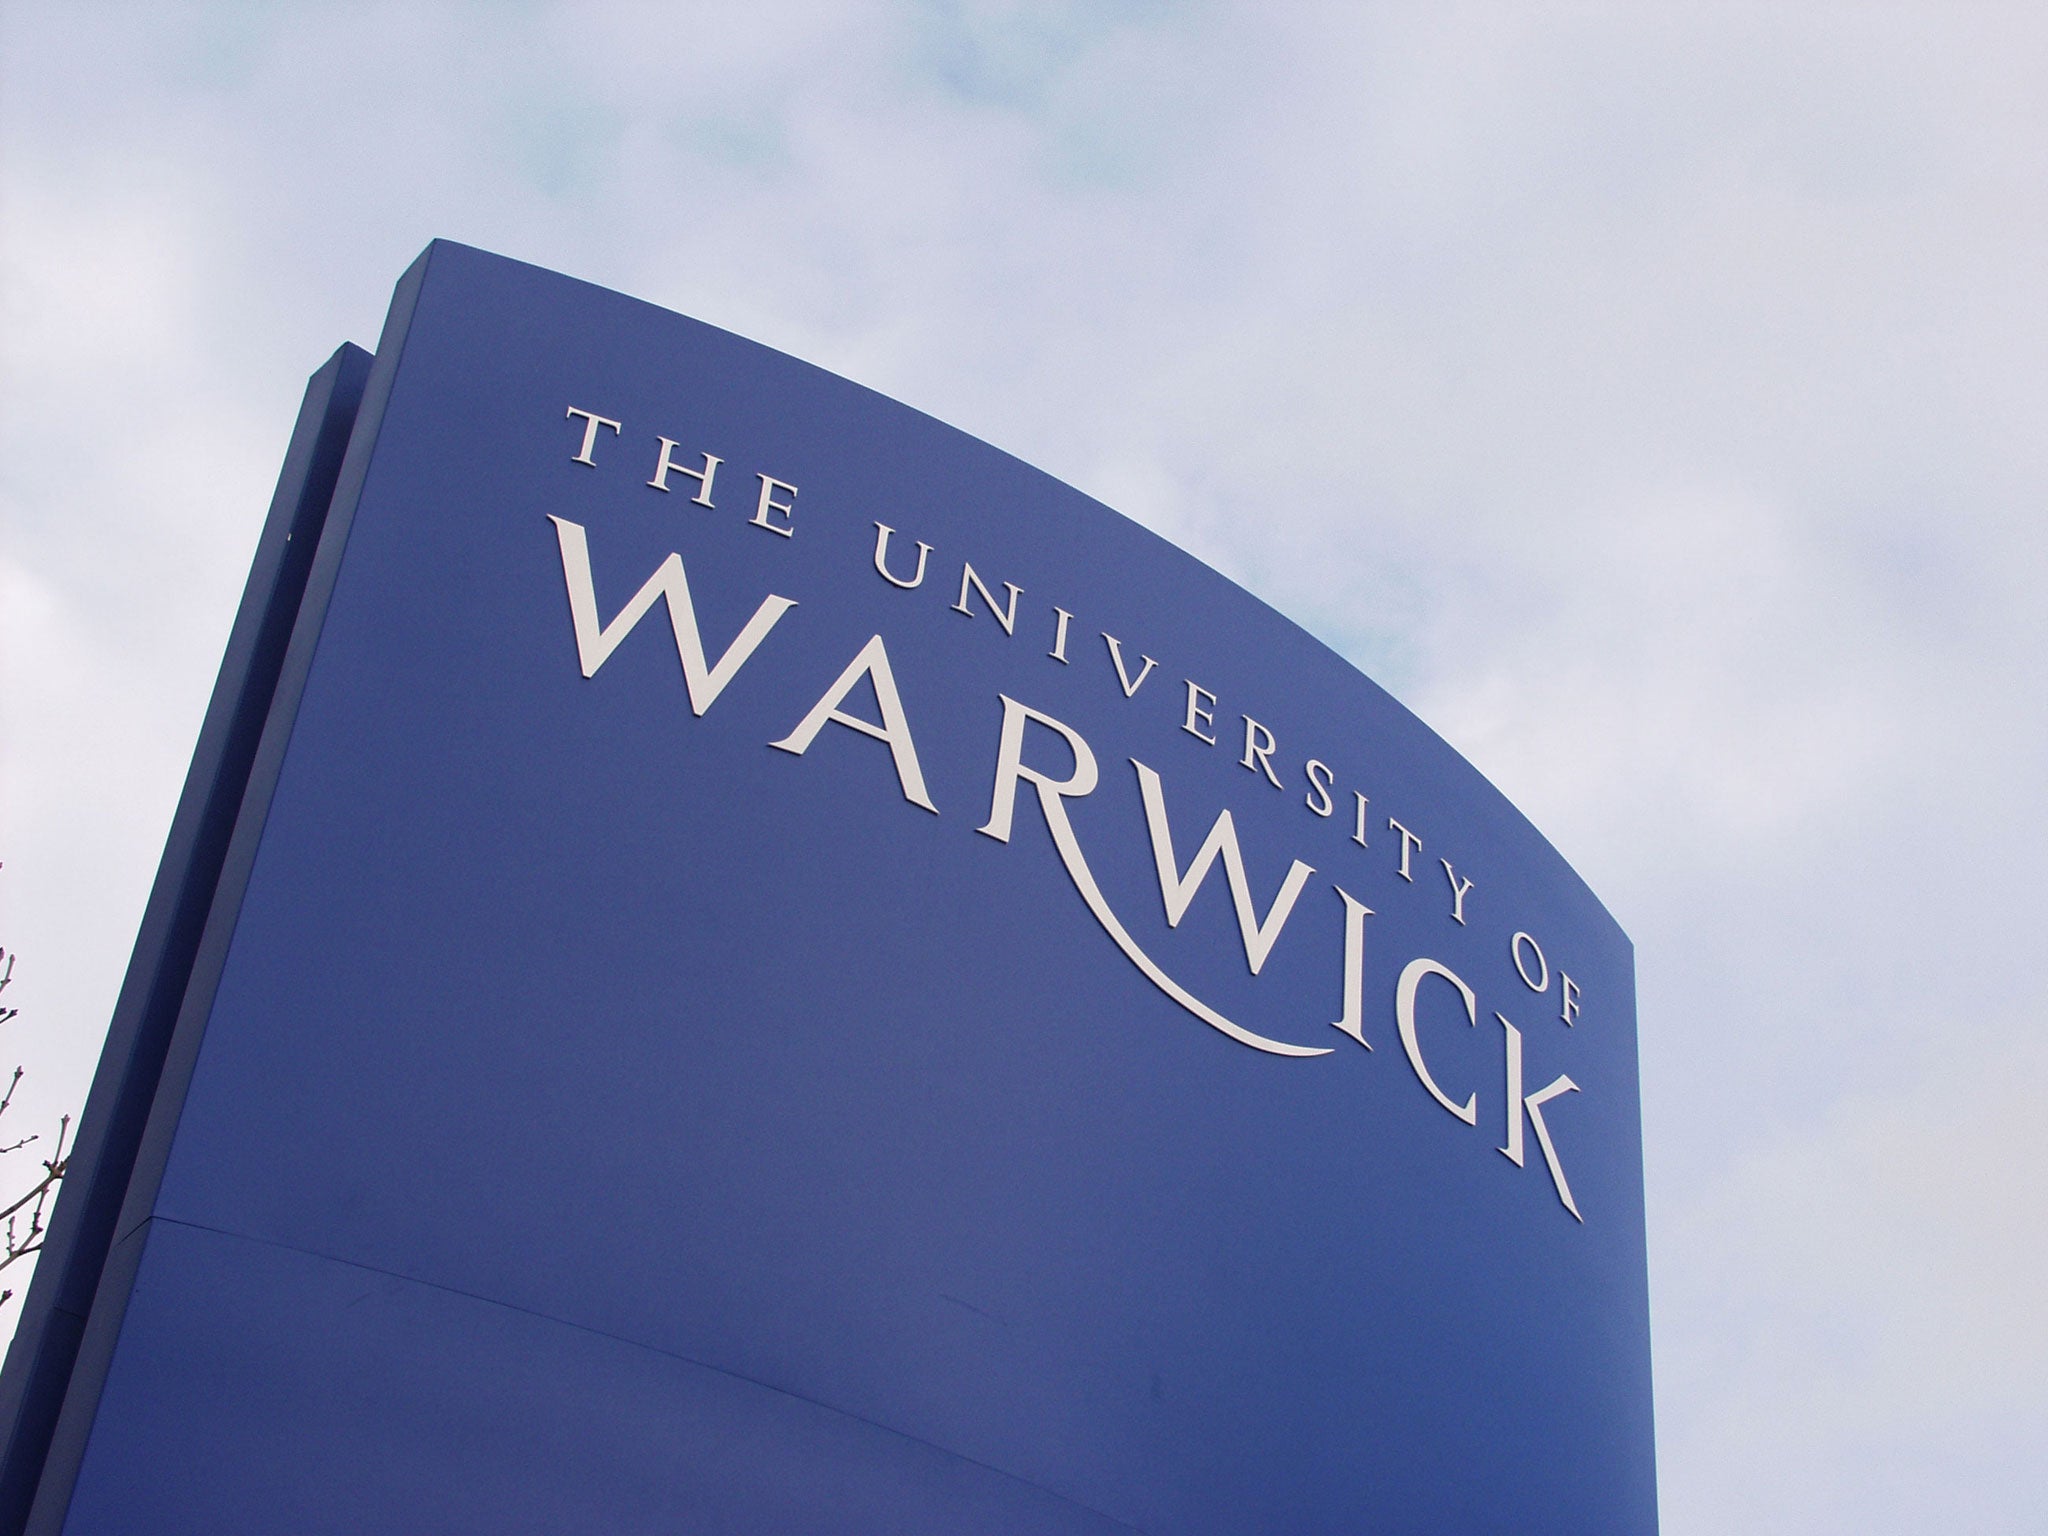 The University of Warwick has agreed to pay Riham Sheble £12,000 in damages